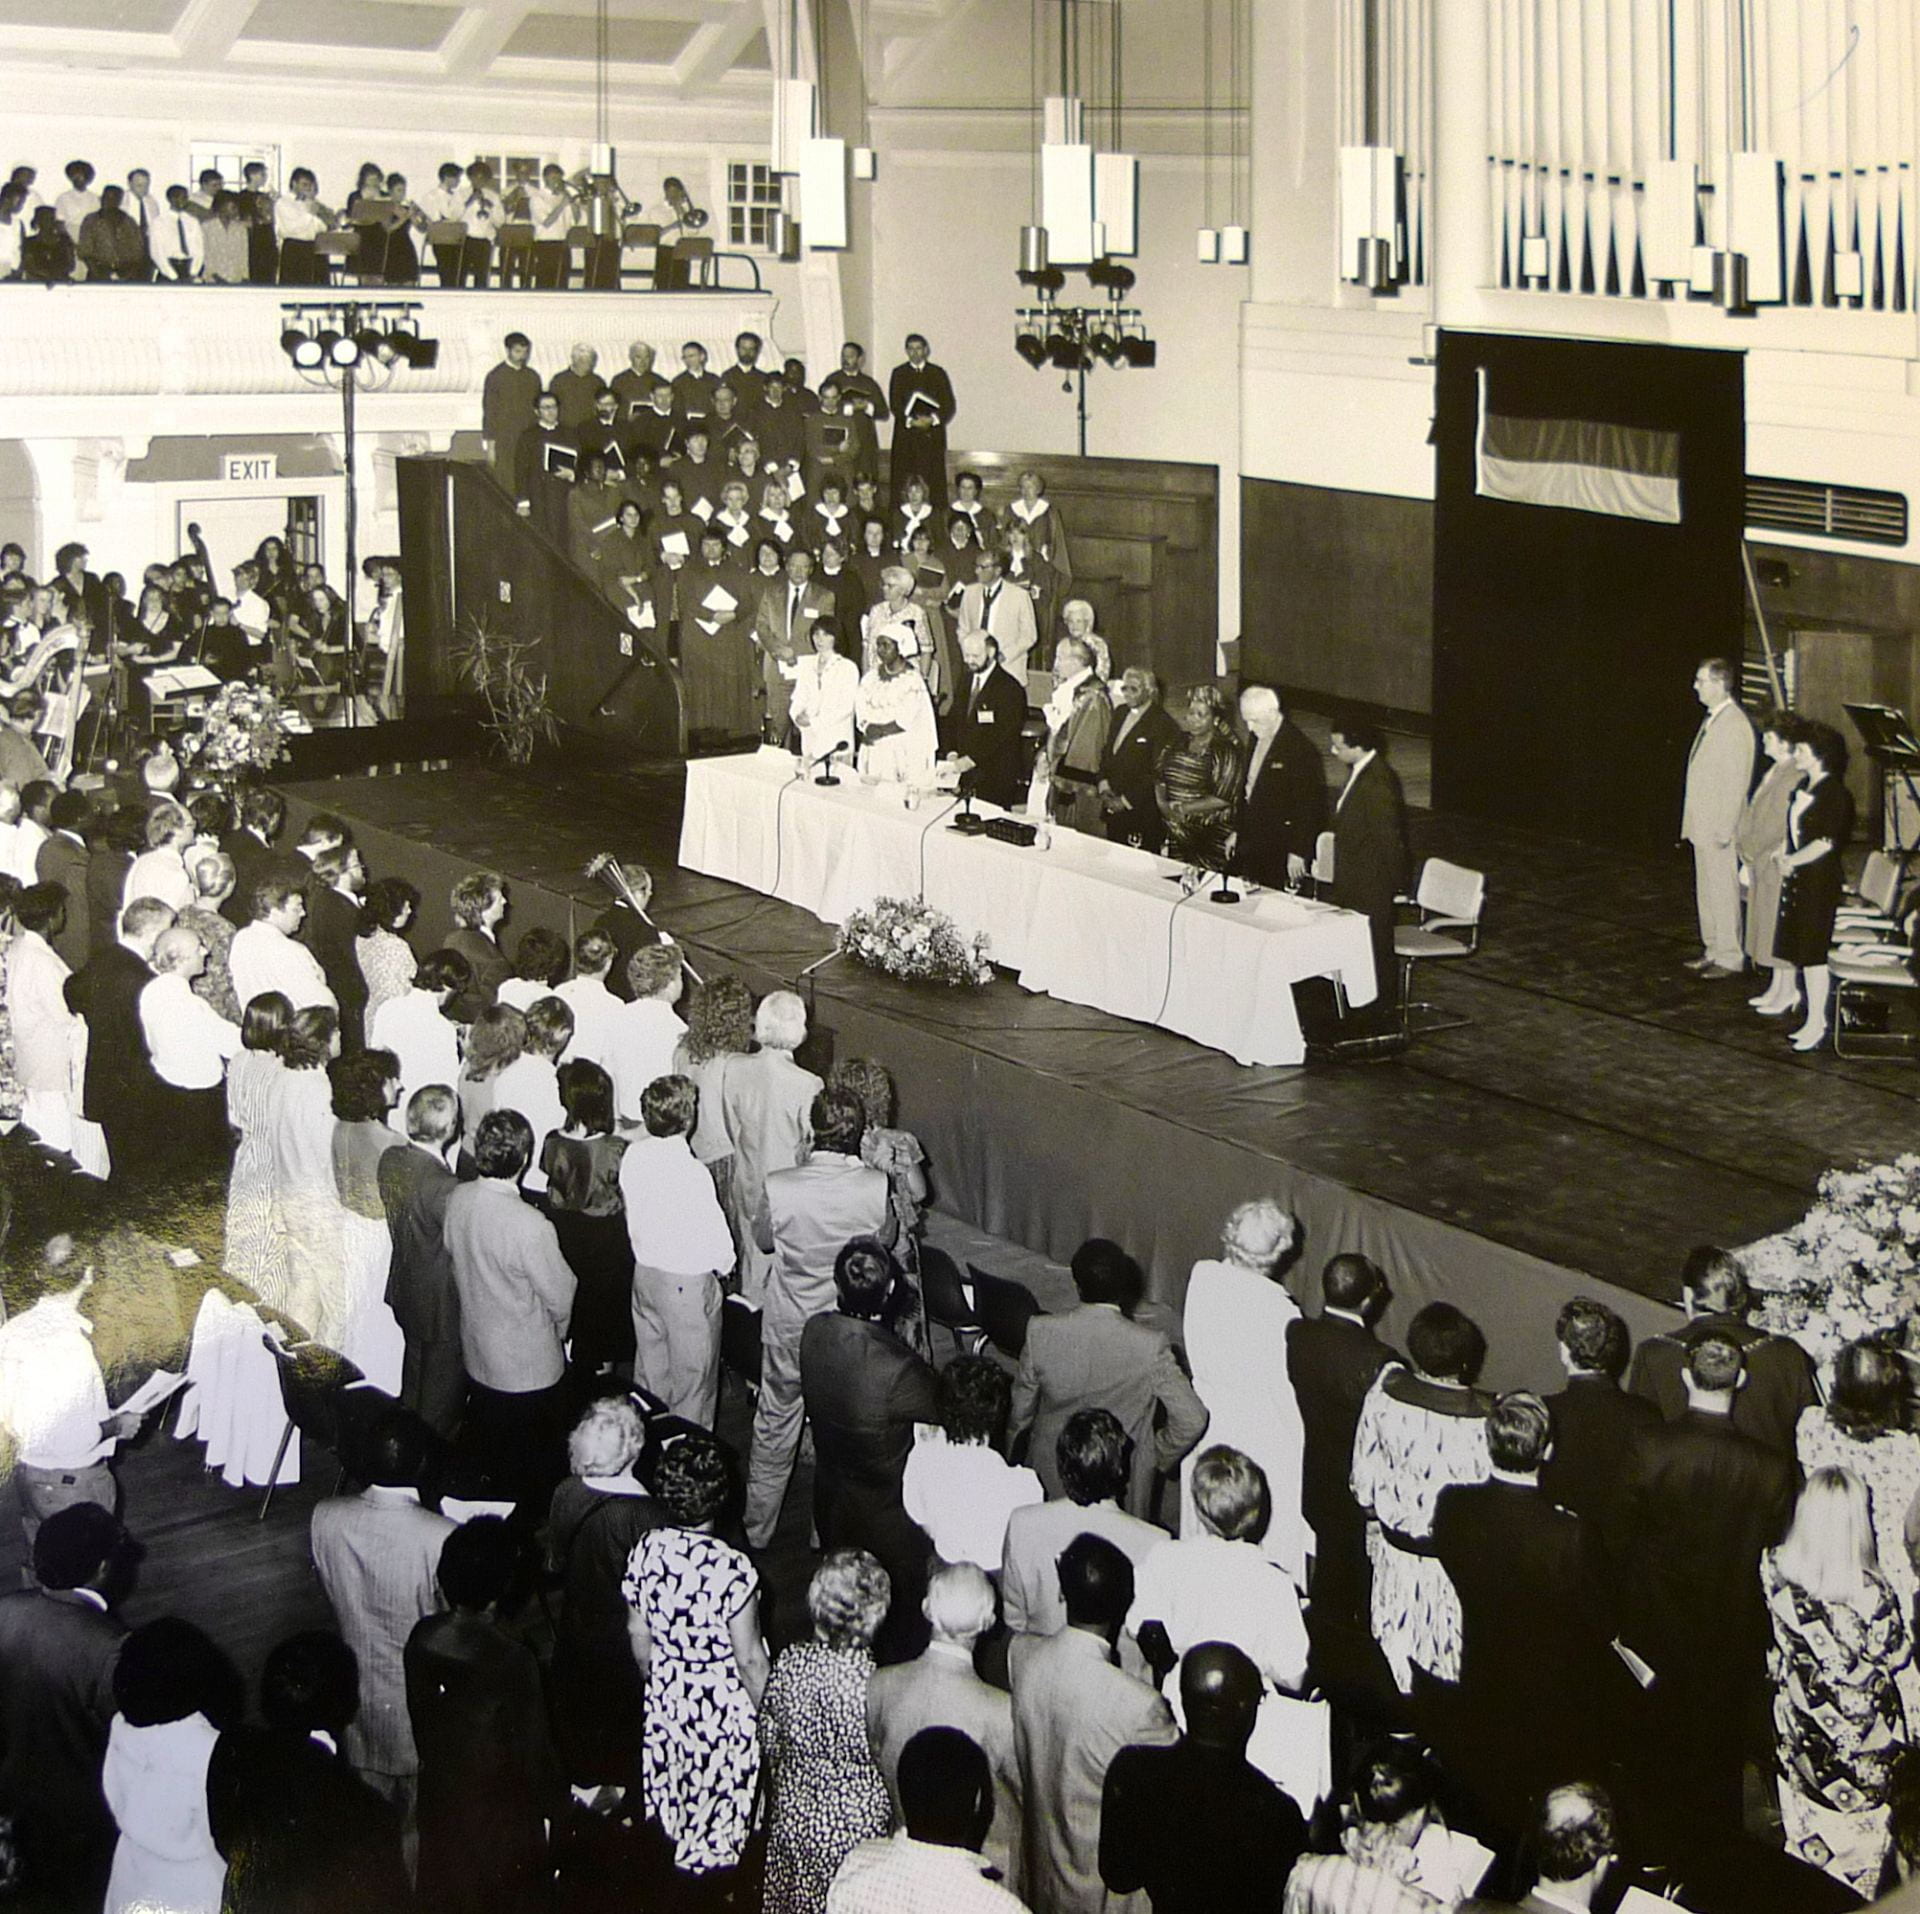 Black and white photograph of the Great Hall of Goldsmiths on May 4th 1990 taken from balcony looking down at stage in front of the organ where his most reverend Desmond Tutu is receiving the honorary freedom of Lewisham. Lewisham Council dignatories, local MP and Goldsmiths' College staff and students present.